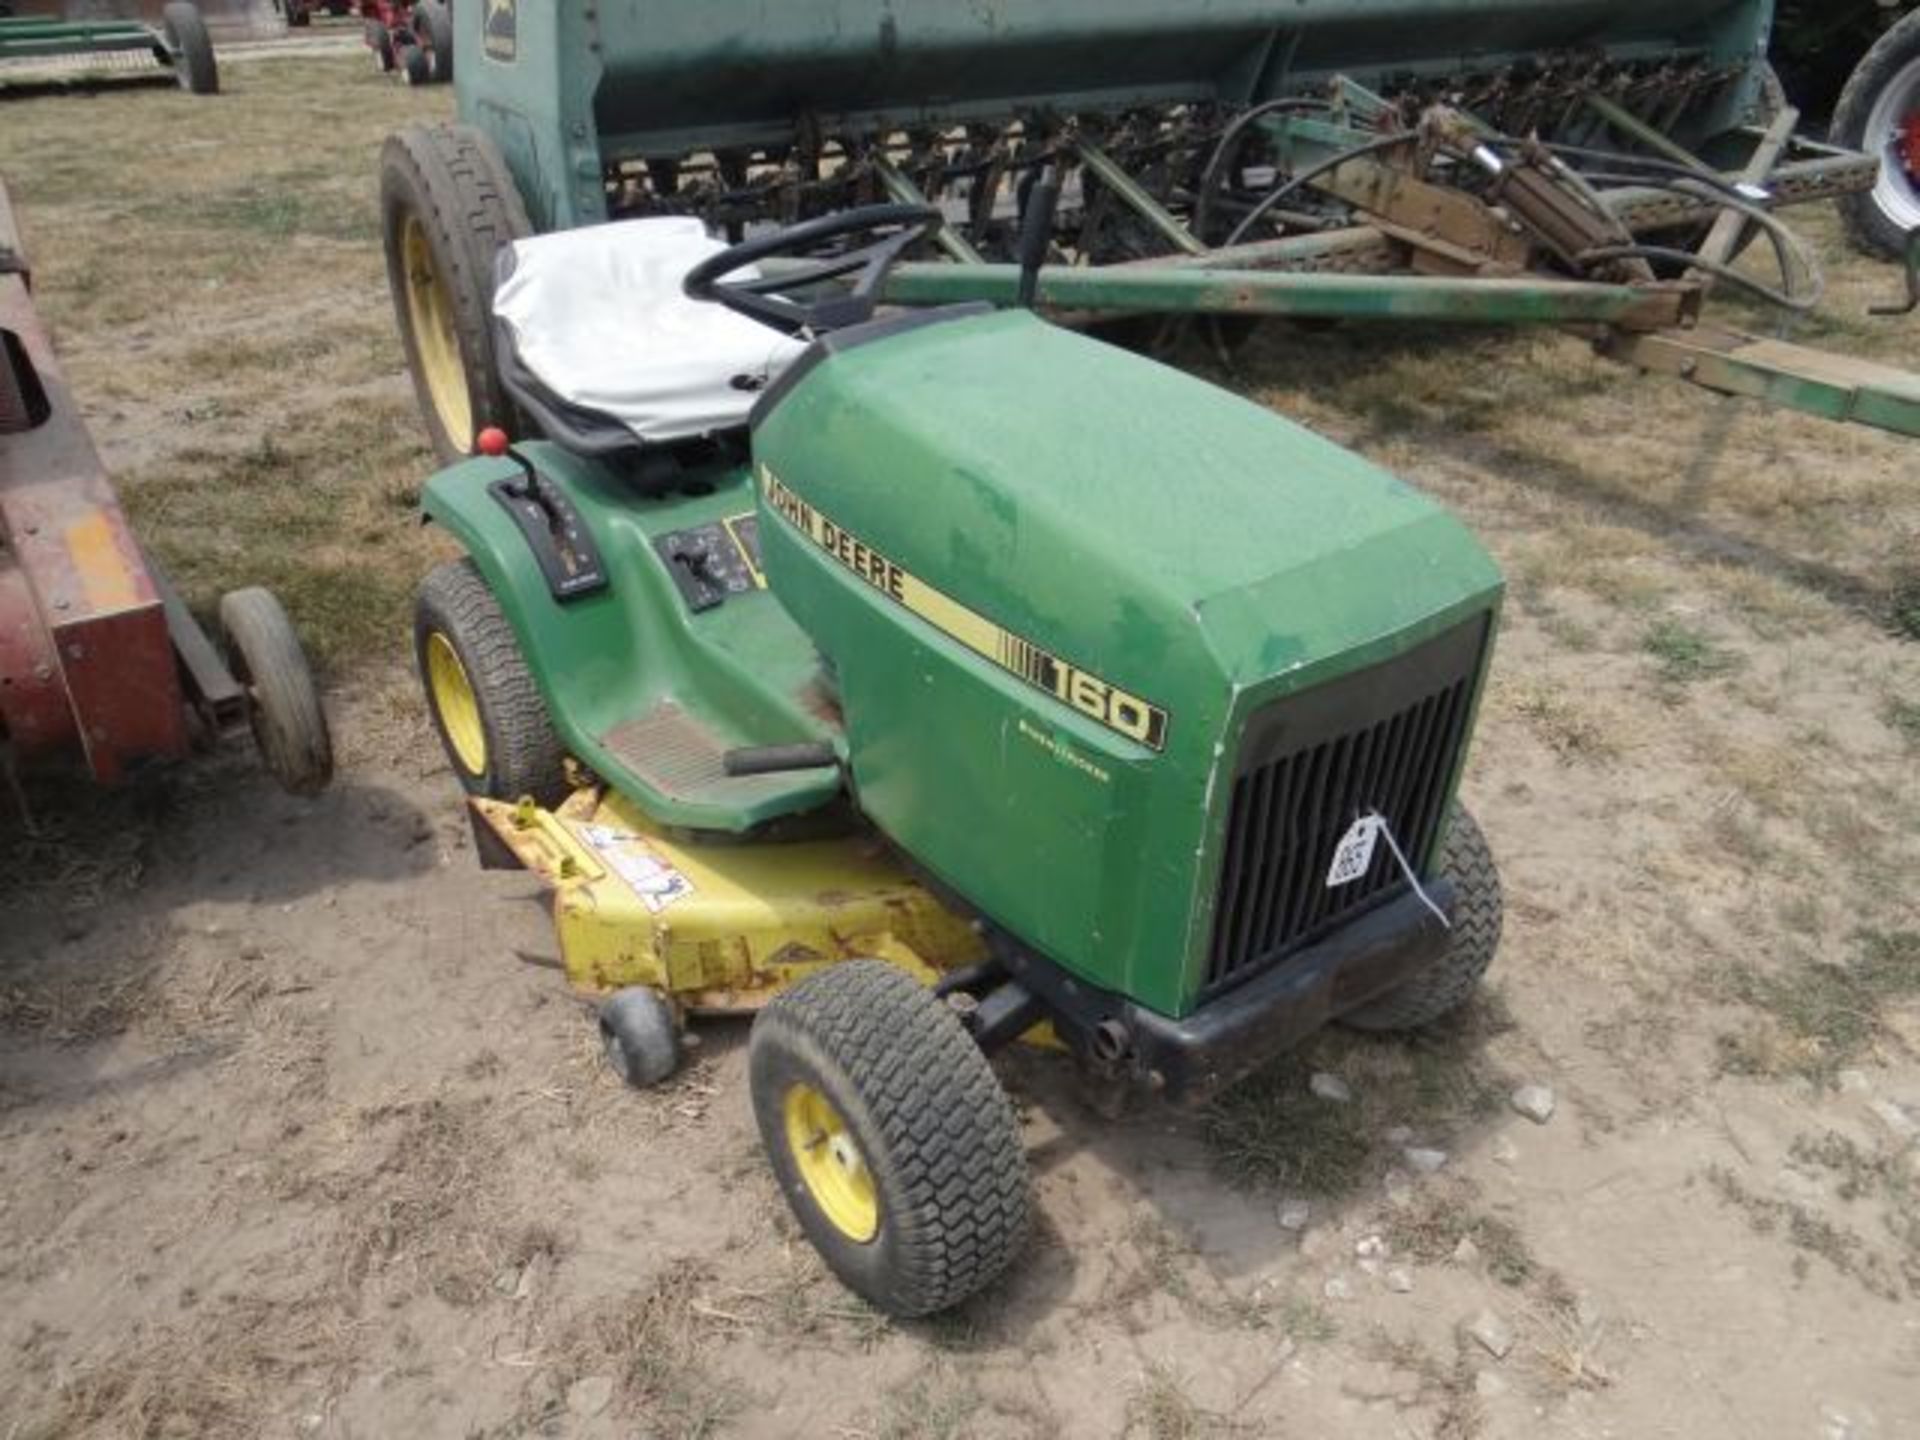 JD 160 Riding Mower, 1987 #150592, 38" Deck, 16hp, 5sp Manual Trans - Image 3 of 3